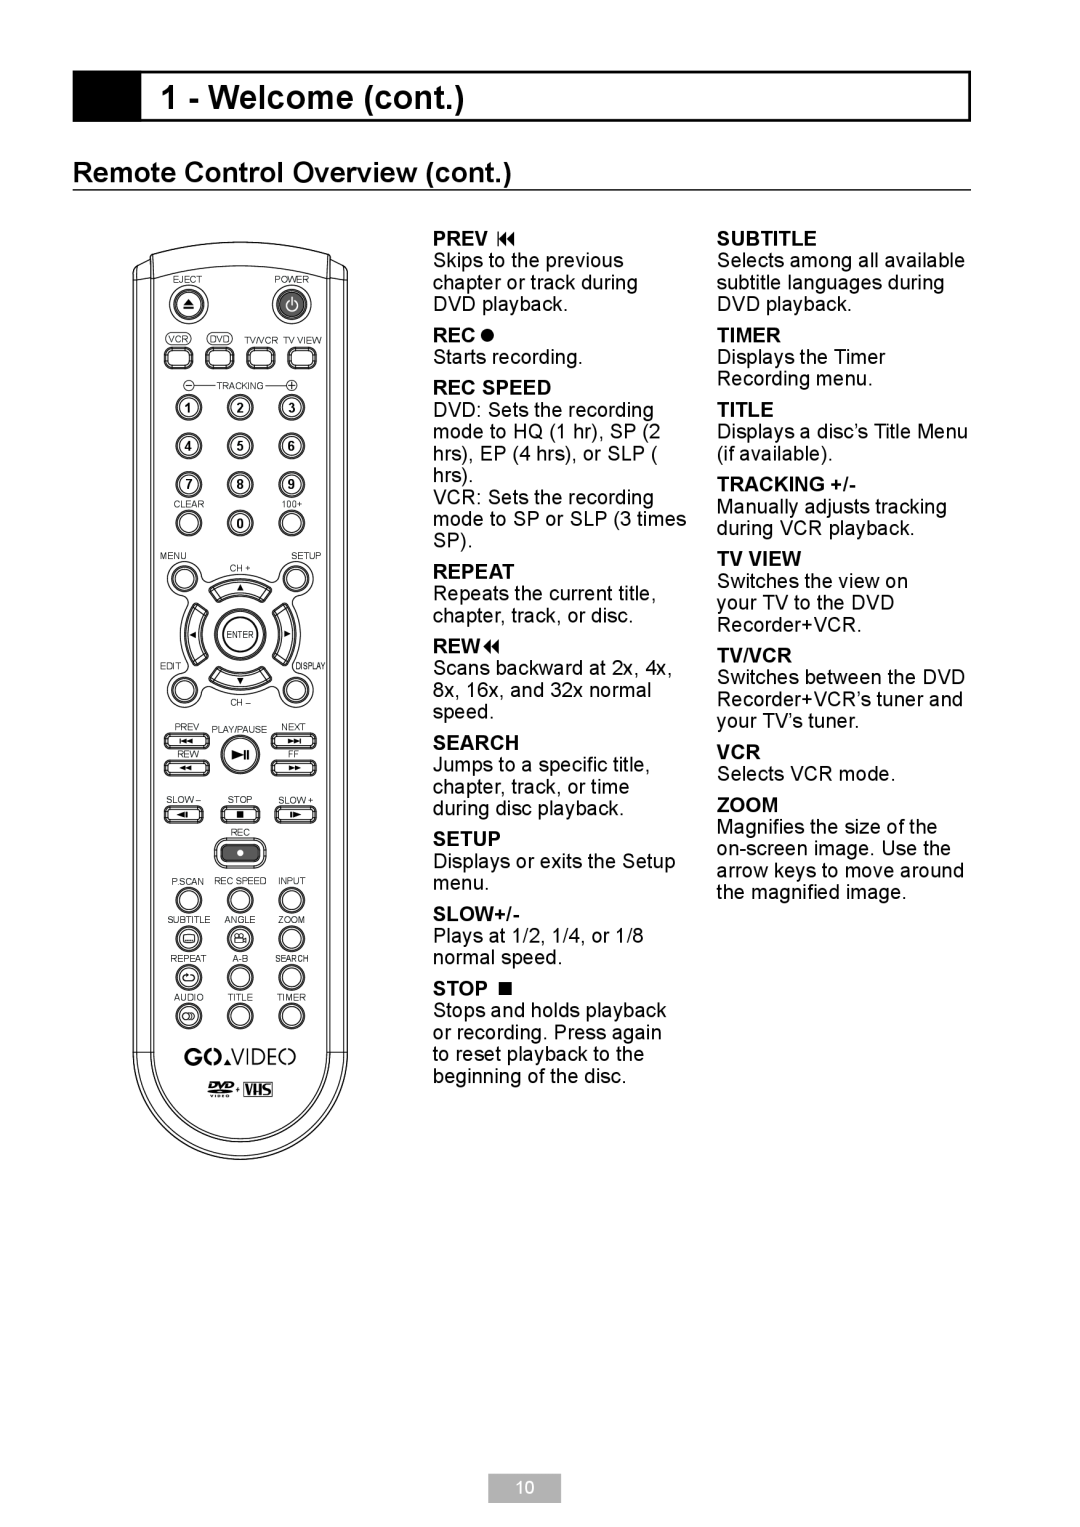 GoVideo VR2940 manual Remote Control Overview cont, Welcome cont 